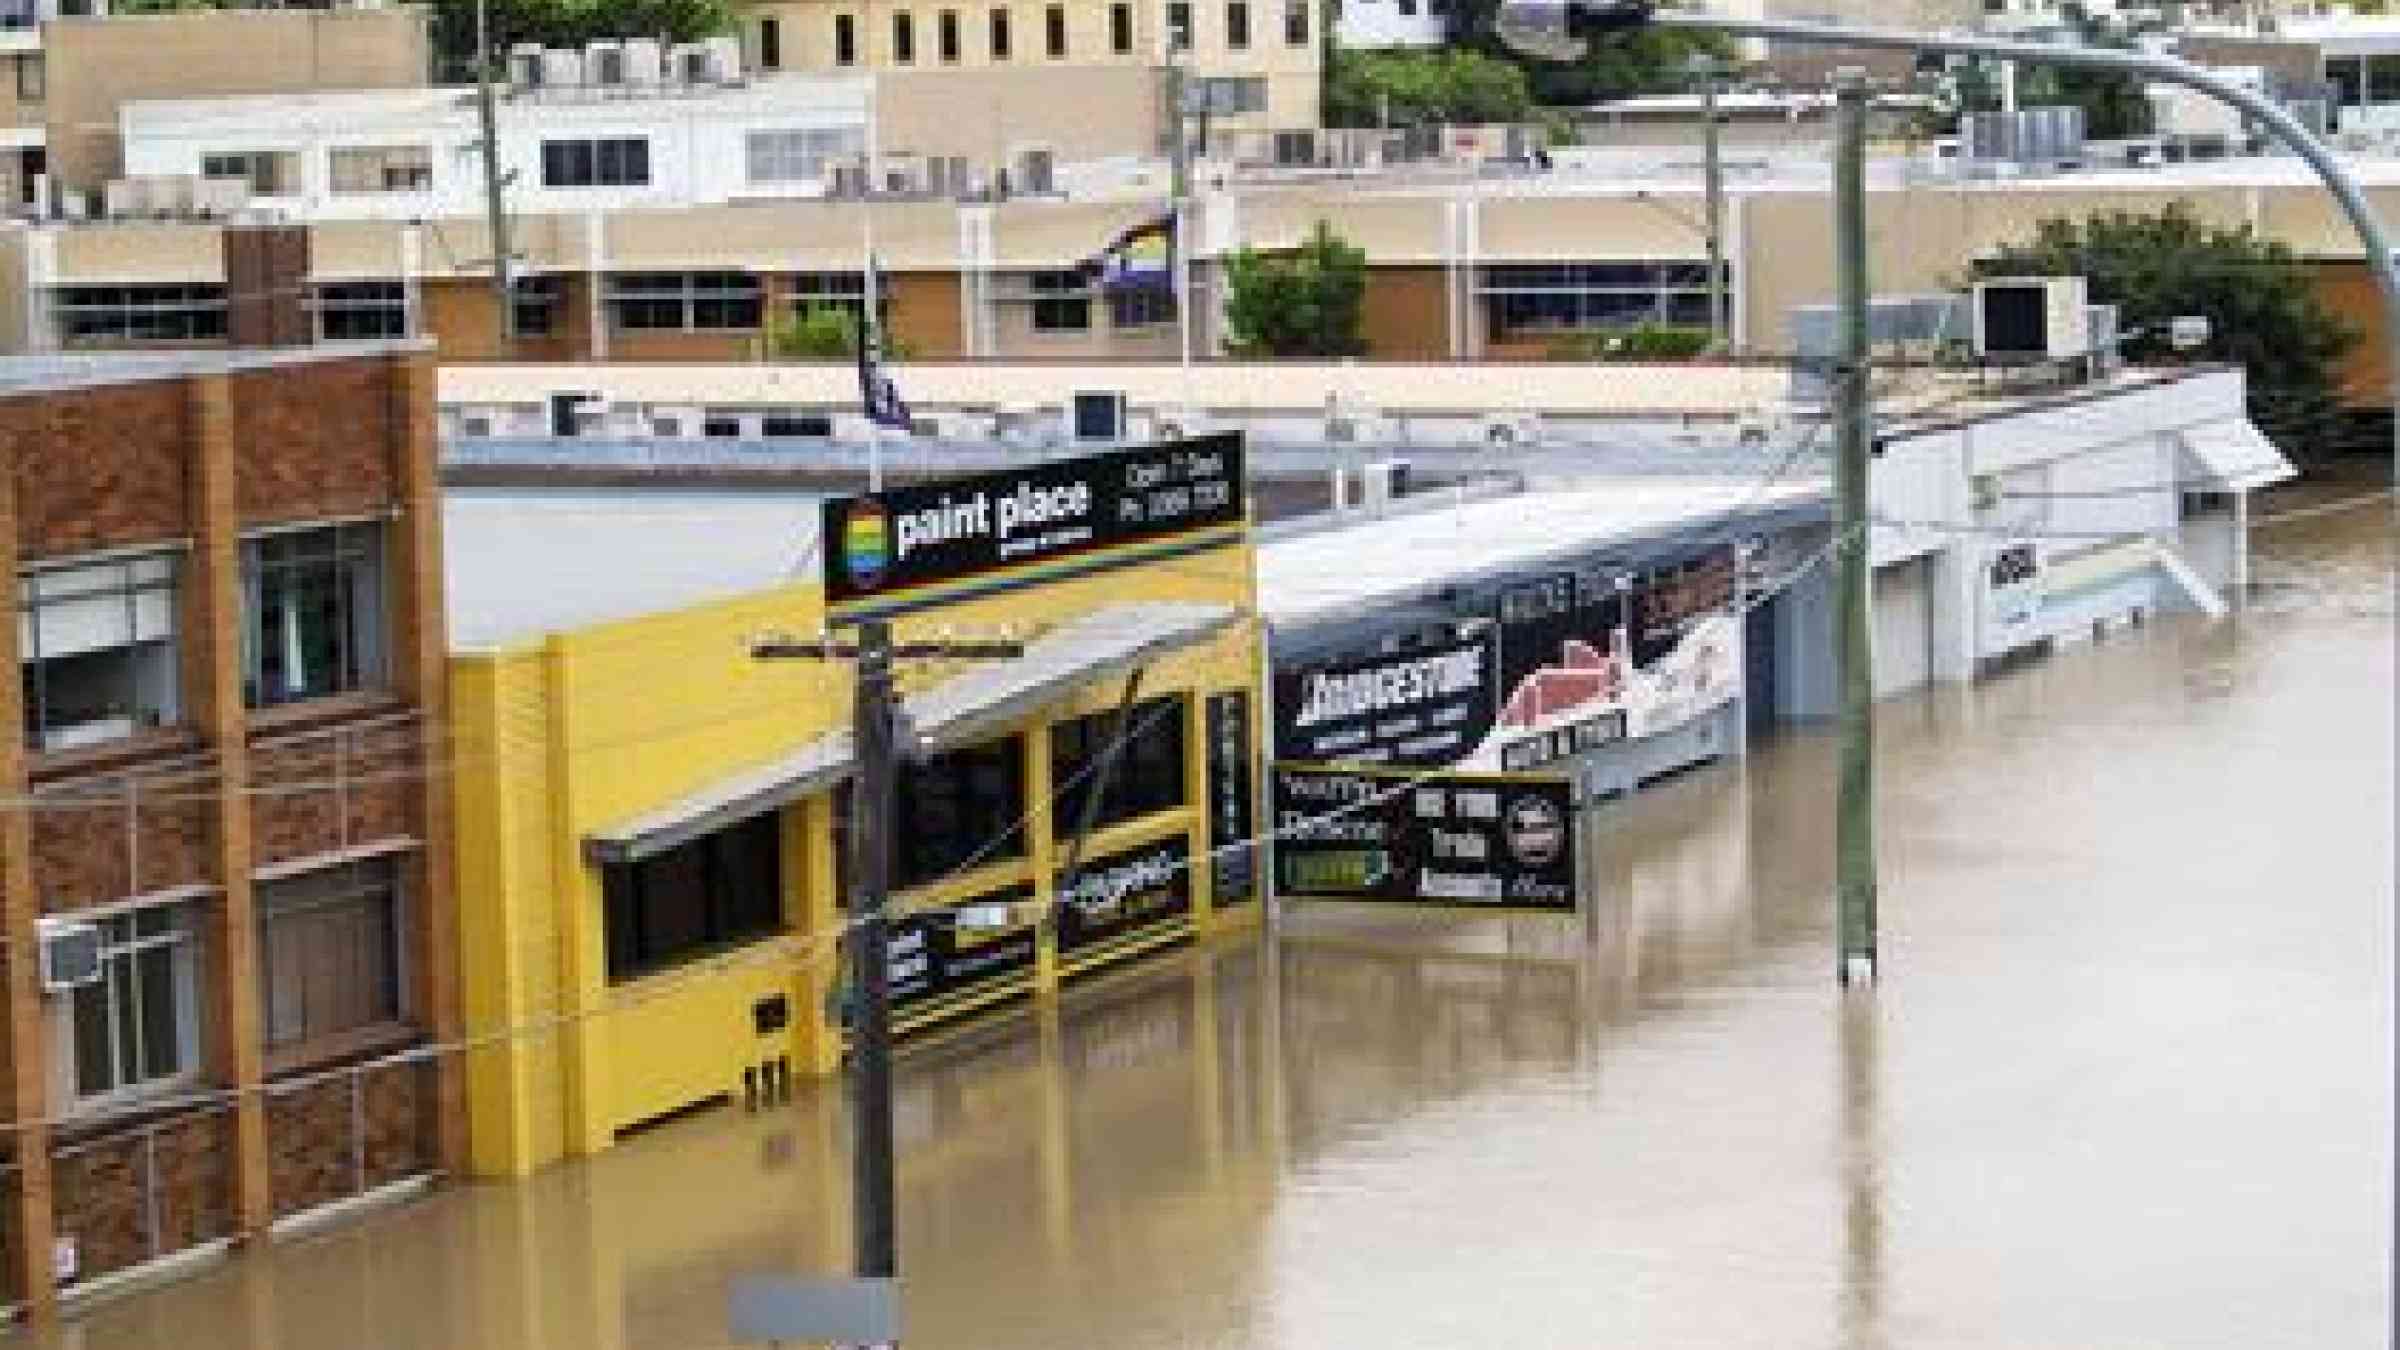 The new winning app has been developed to help deal with flooding in Australia.